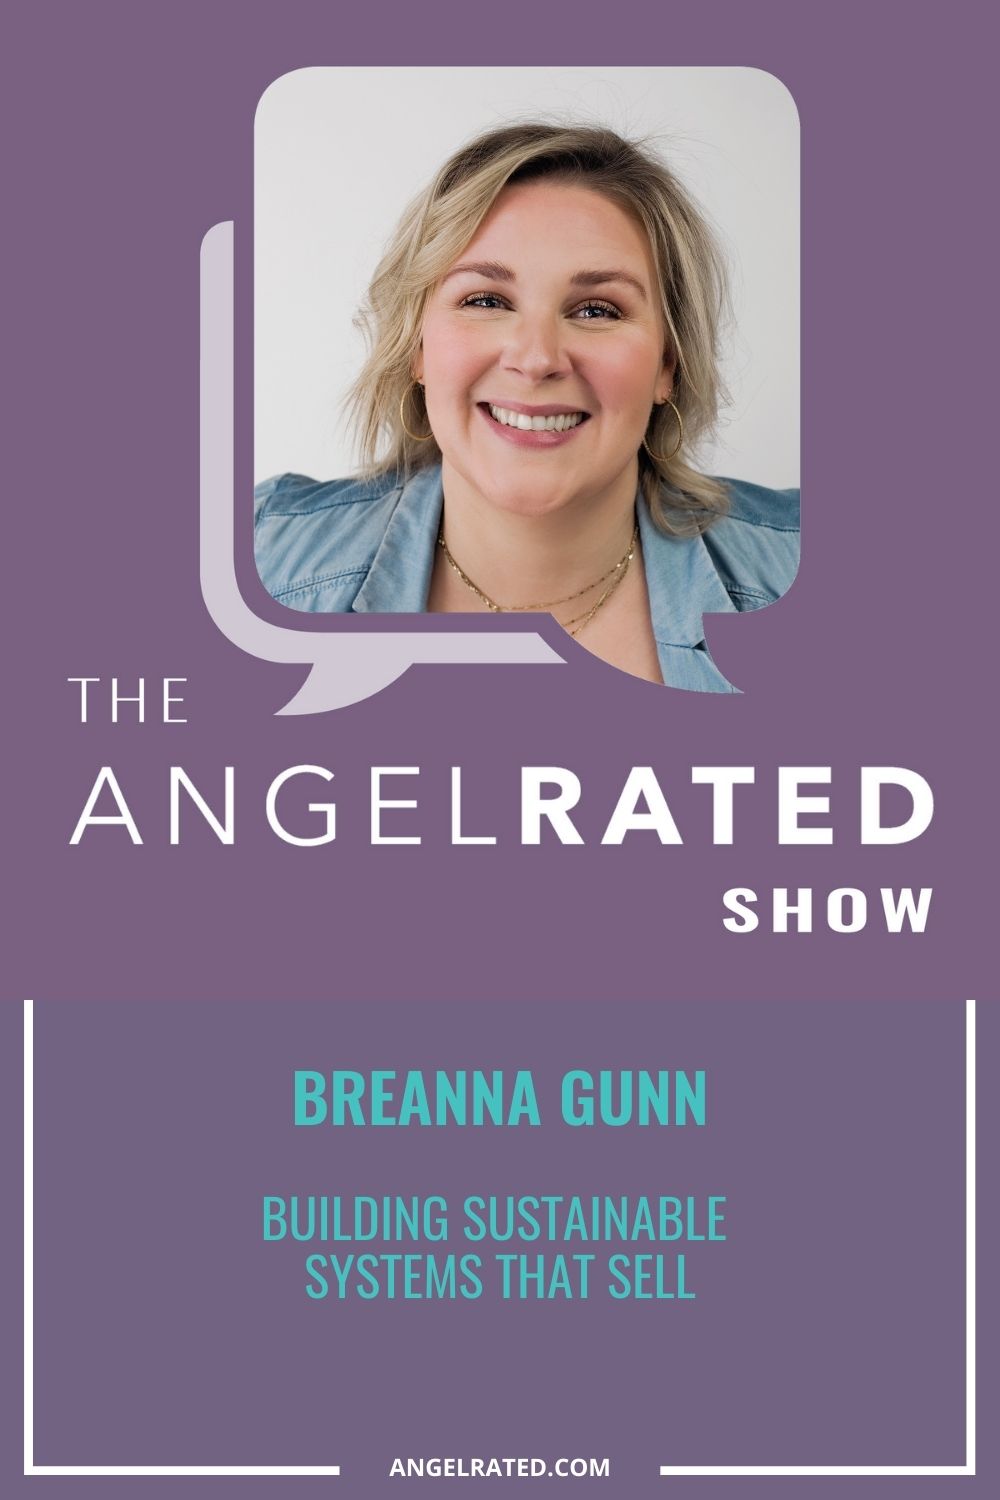 Breanna Gunn: Building sustainable systems that sell